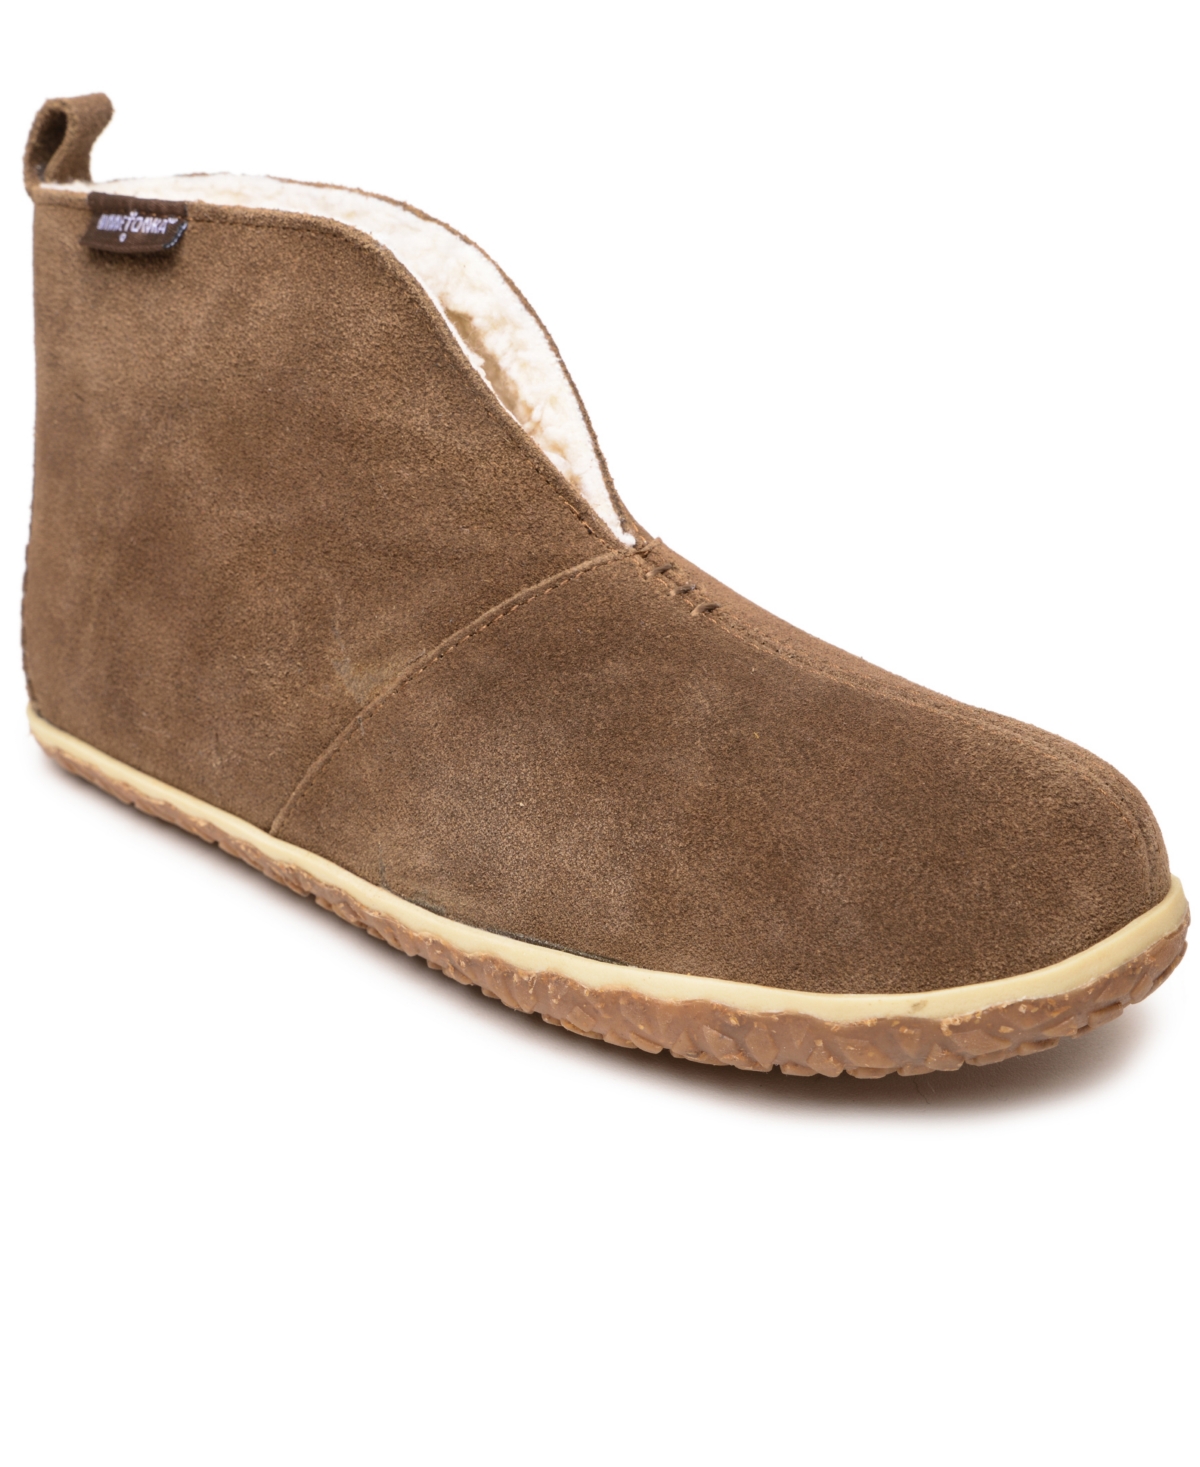 Men's Tamson Lined Suede Boots - Autumn Brown